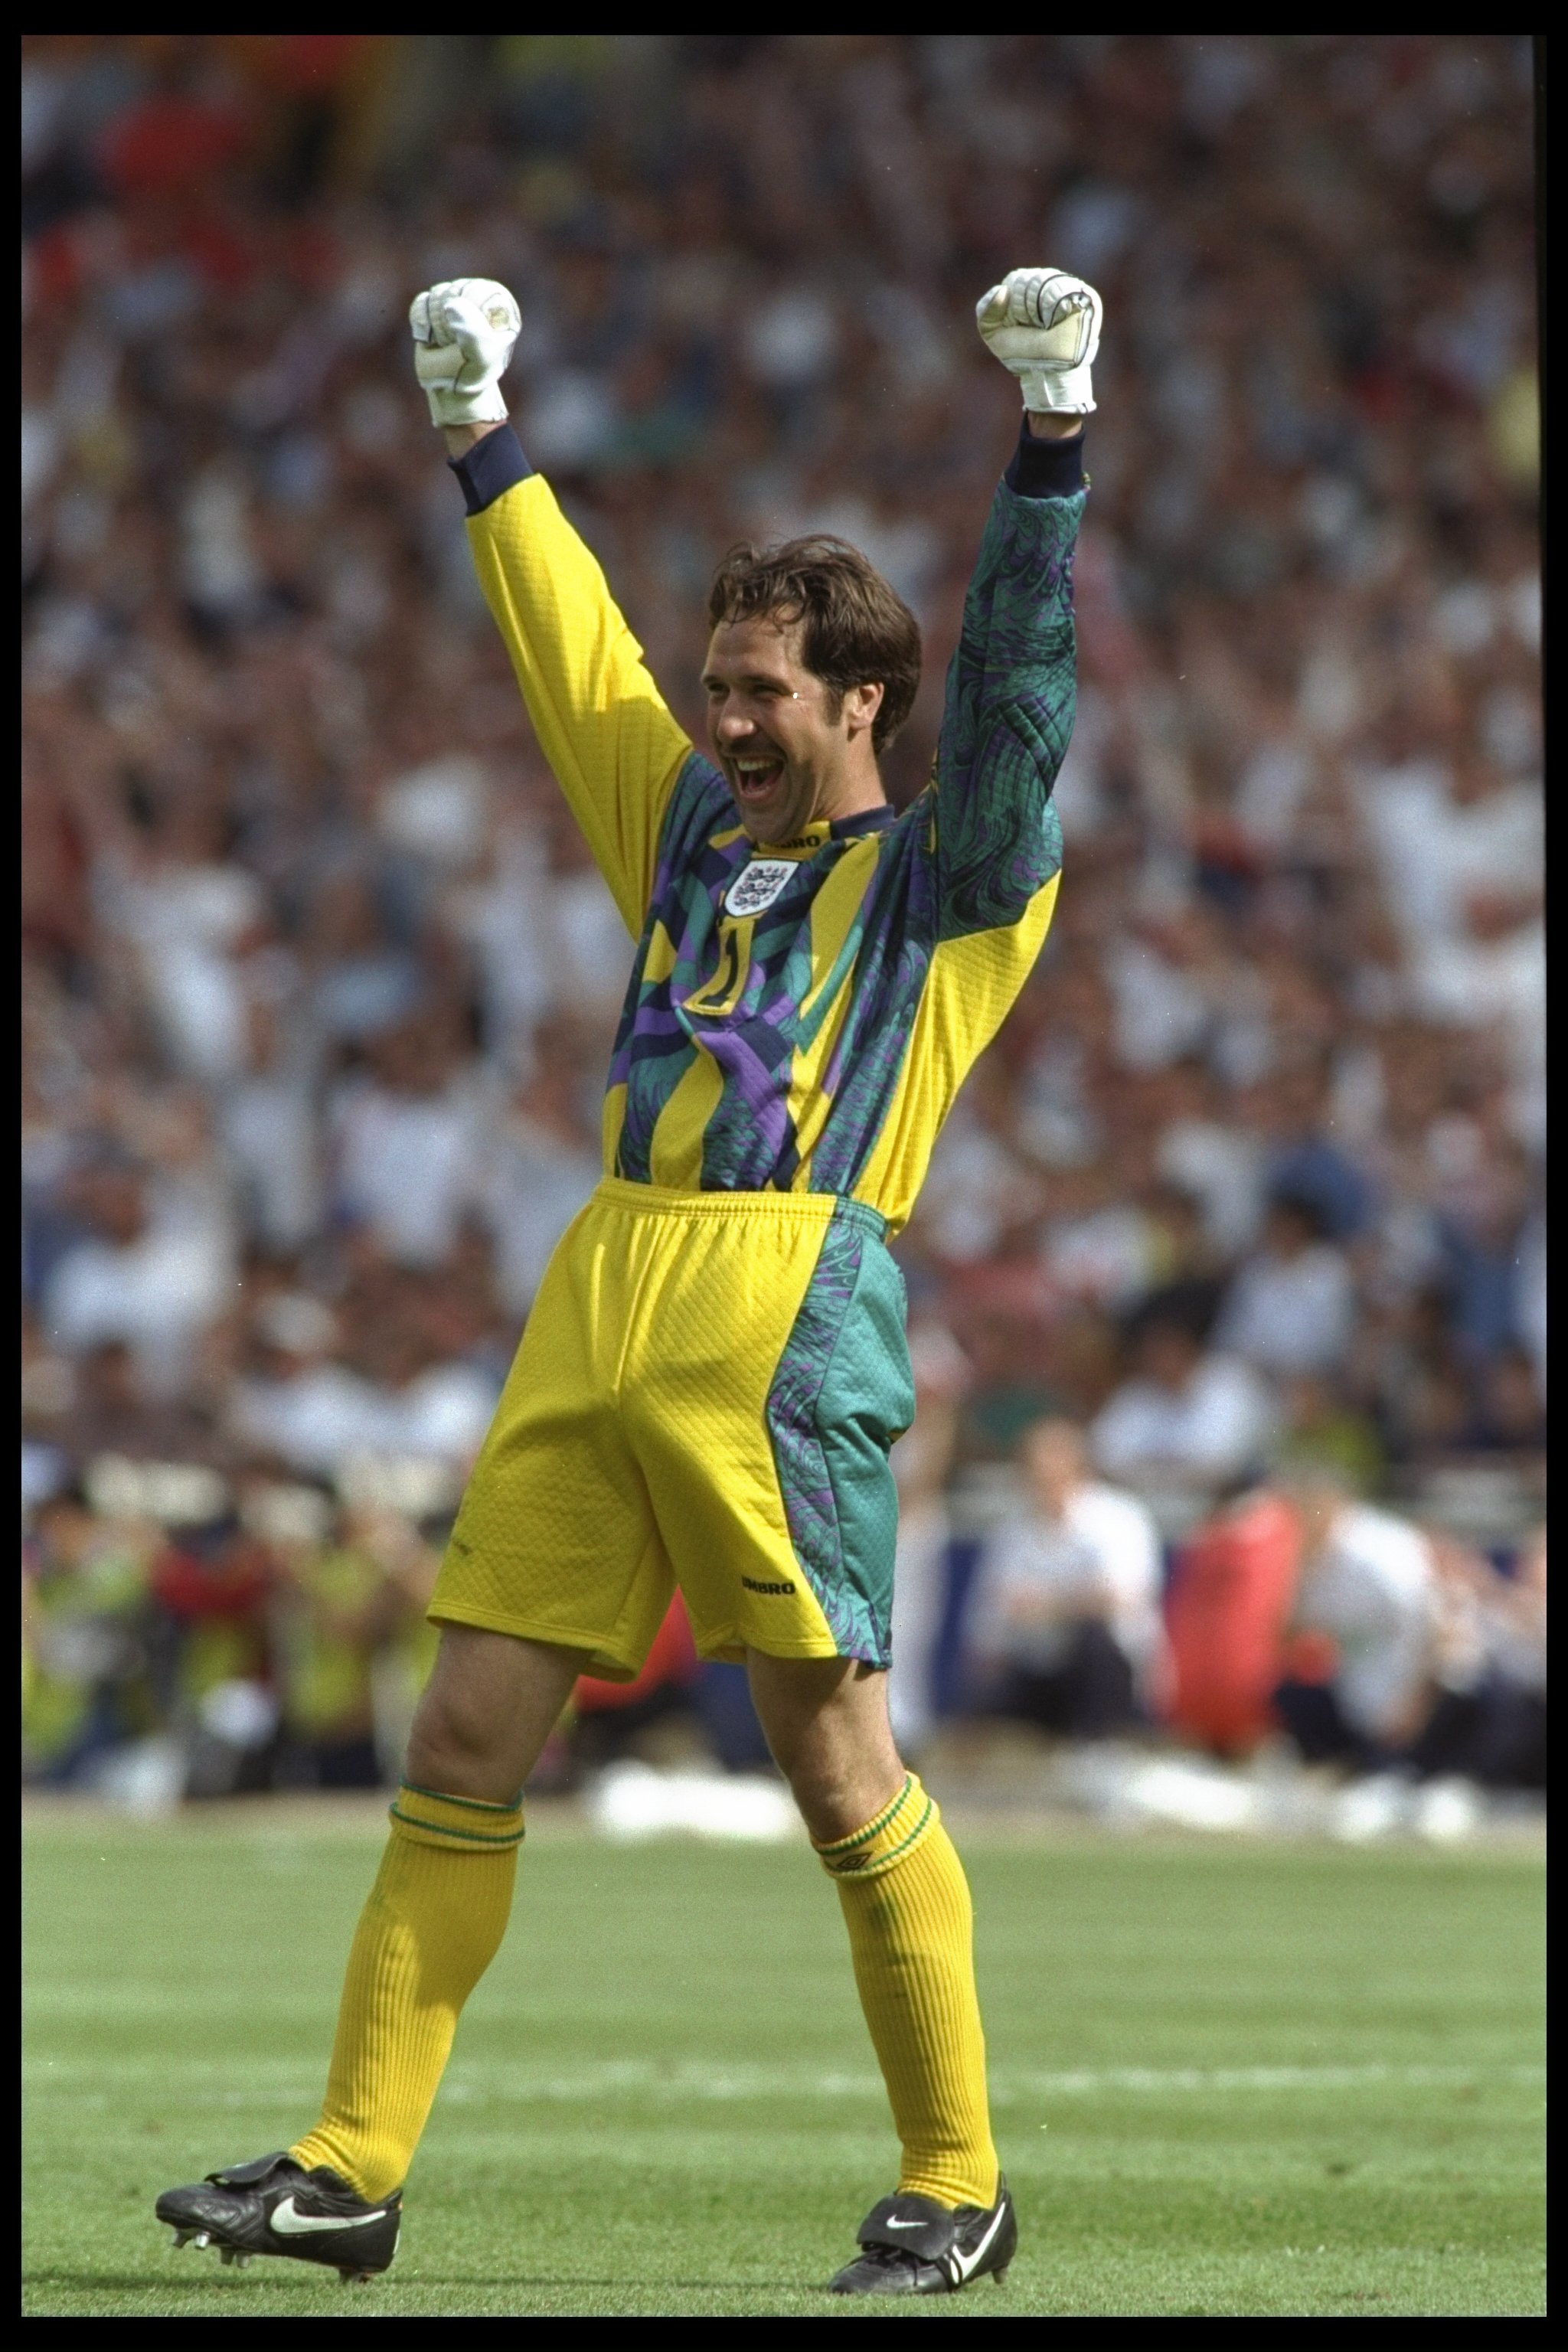 15 Jun 1996:   Goalkeeper David Seaman celebrates victory at the end of the England v Scotland match in Group A of the European Football Championships at Wembley. David Seaman, who was capped 75 times for England, announced his decision to retire January